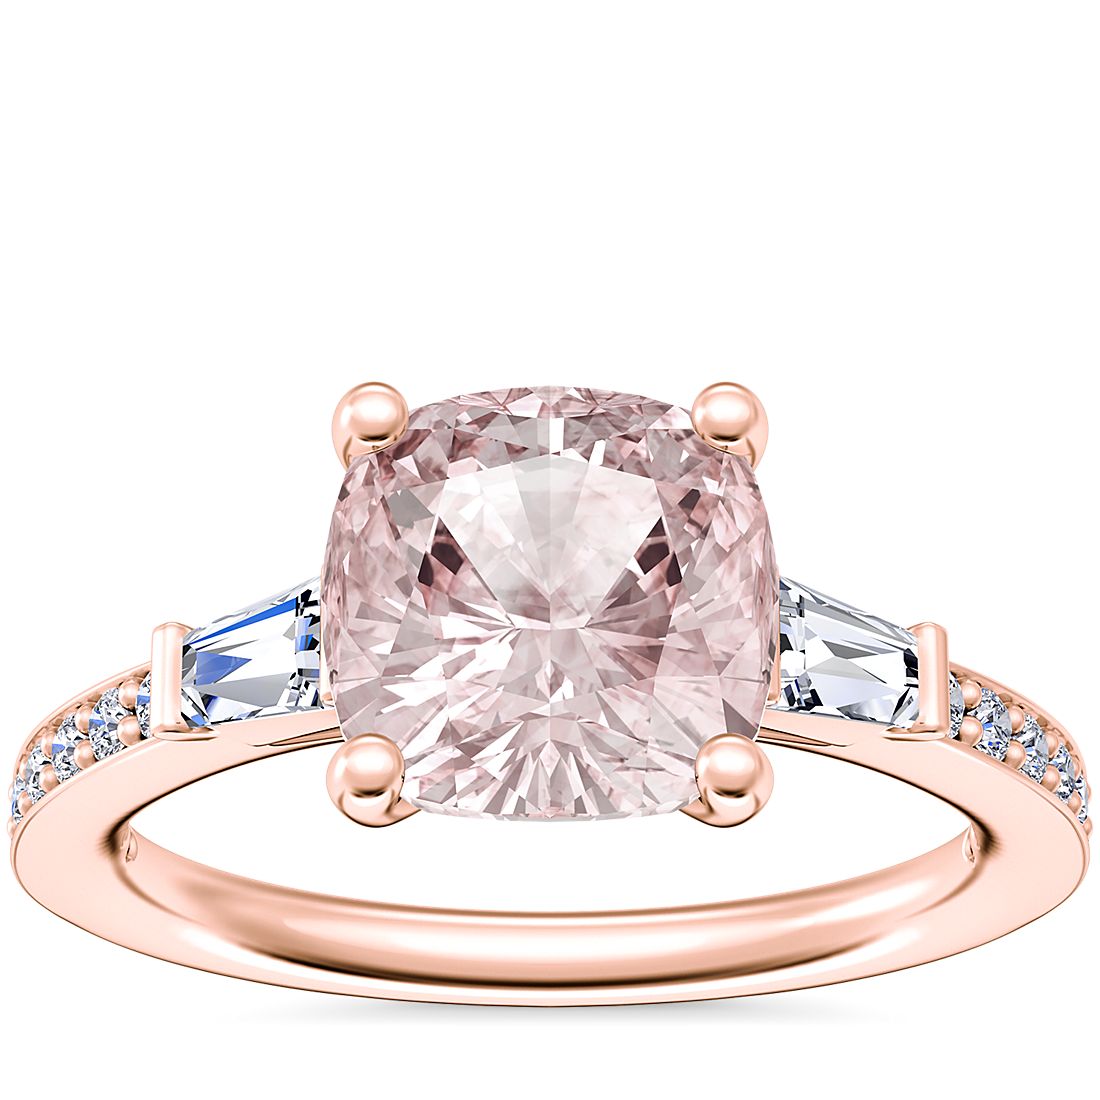 Tapered Baguette Diamond Cathedral Engagement Ring with Cushion Morganite in 14k Rose Gold (8mm)